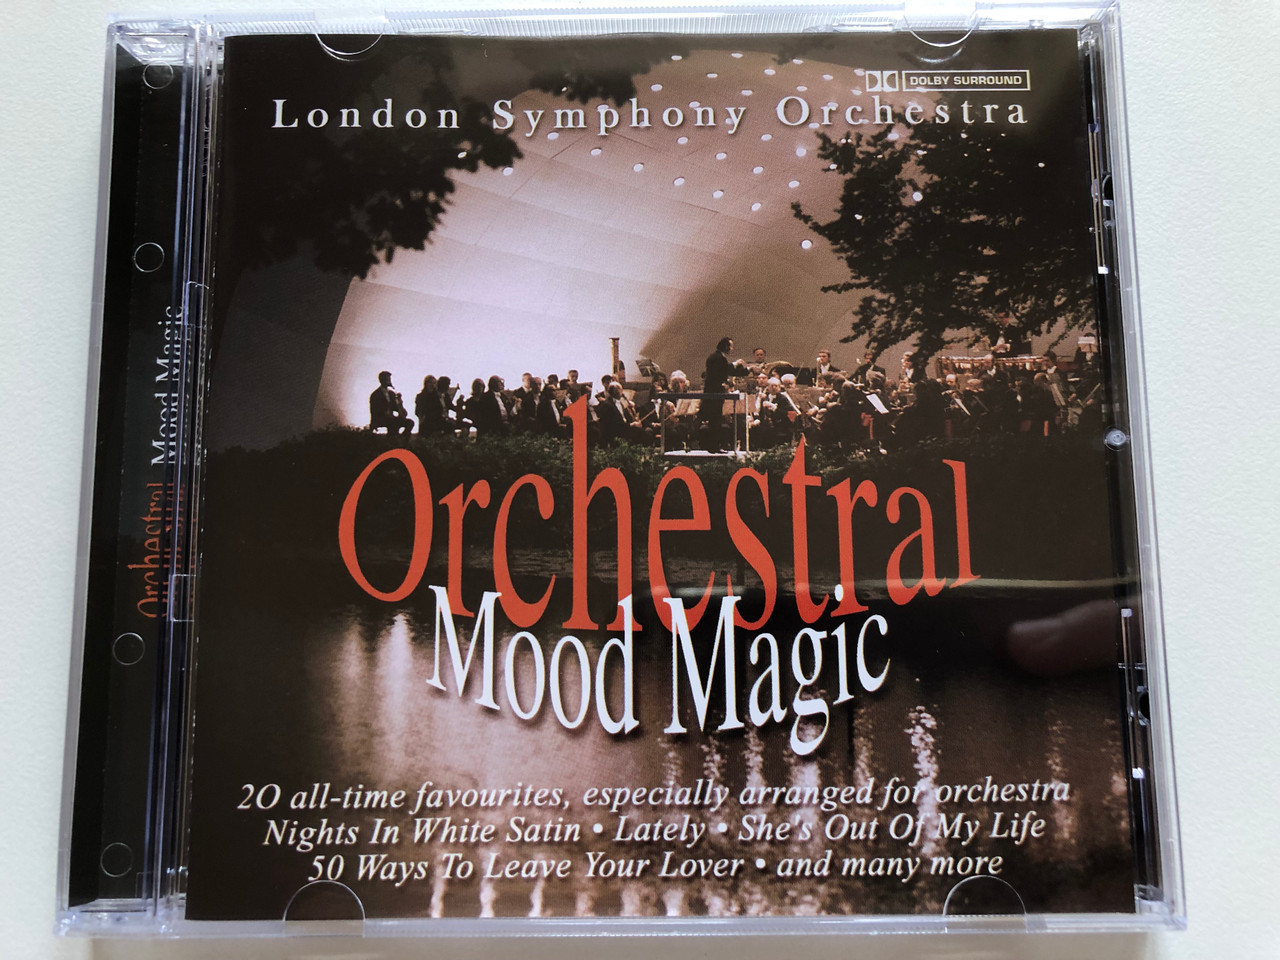 https://cdn10.bigcommerce.com/s-62bdpkt7pb/products/0/images/211085/London_Symphony_Orchestra_Orchestral_Mood_Magic_20_all-time_favourites_especially_arranged_for_orchestra_-_Nights_In_White_Satin_Lately_Shes_Out_Of_My_Life_50_Ways_To_Leave_Your_Lover_1__70777.1643796022.1280.1280.JPG?c=2&_gl=1*1g03v9v*_ga*MjA2NTIxMjE2MC4xNTkwNTEyNTMy*_ga_WS2VZYPC6G*MTY0Mzc4MTAzOS4yODIuMS4xNjQzNzk1NjA0LjU3